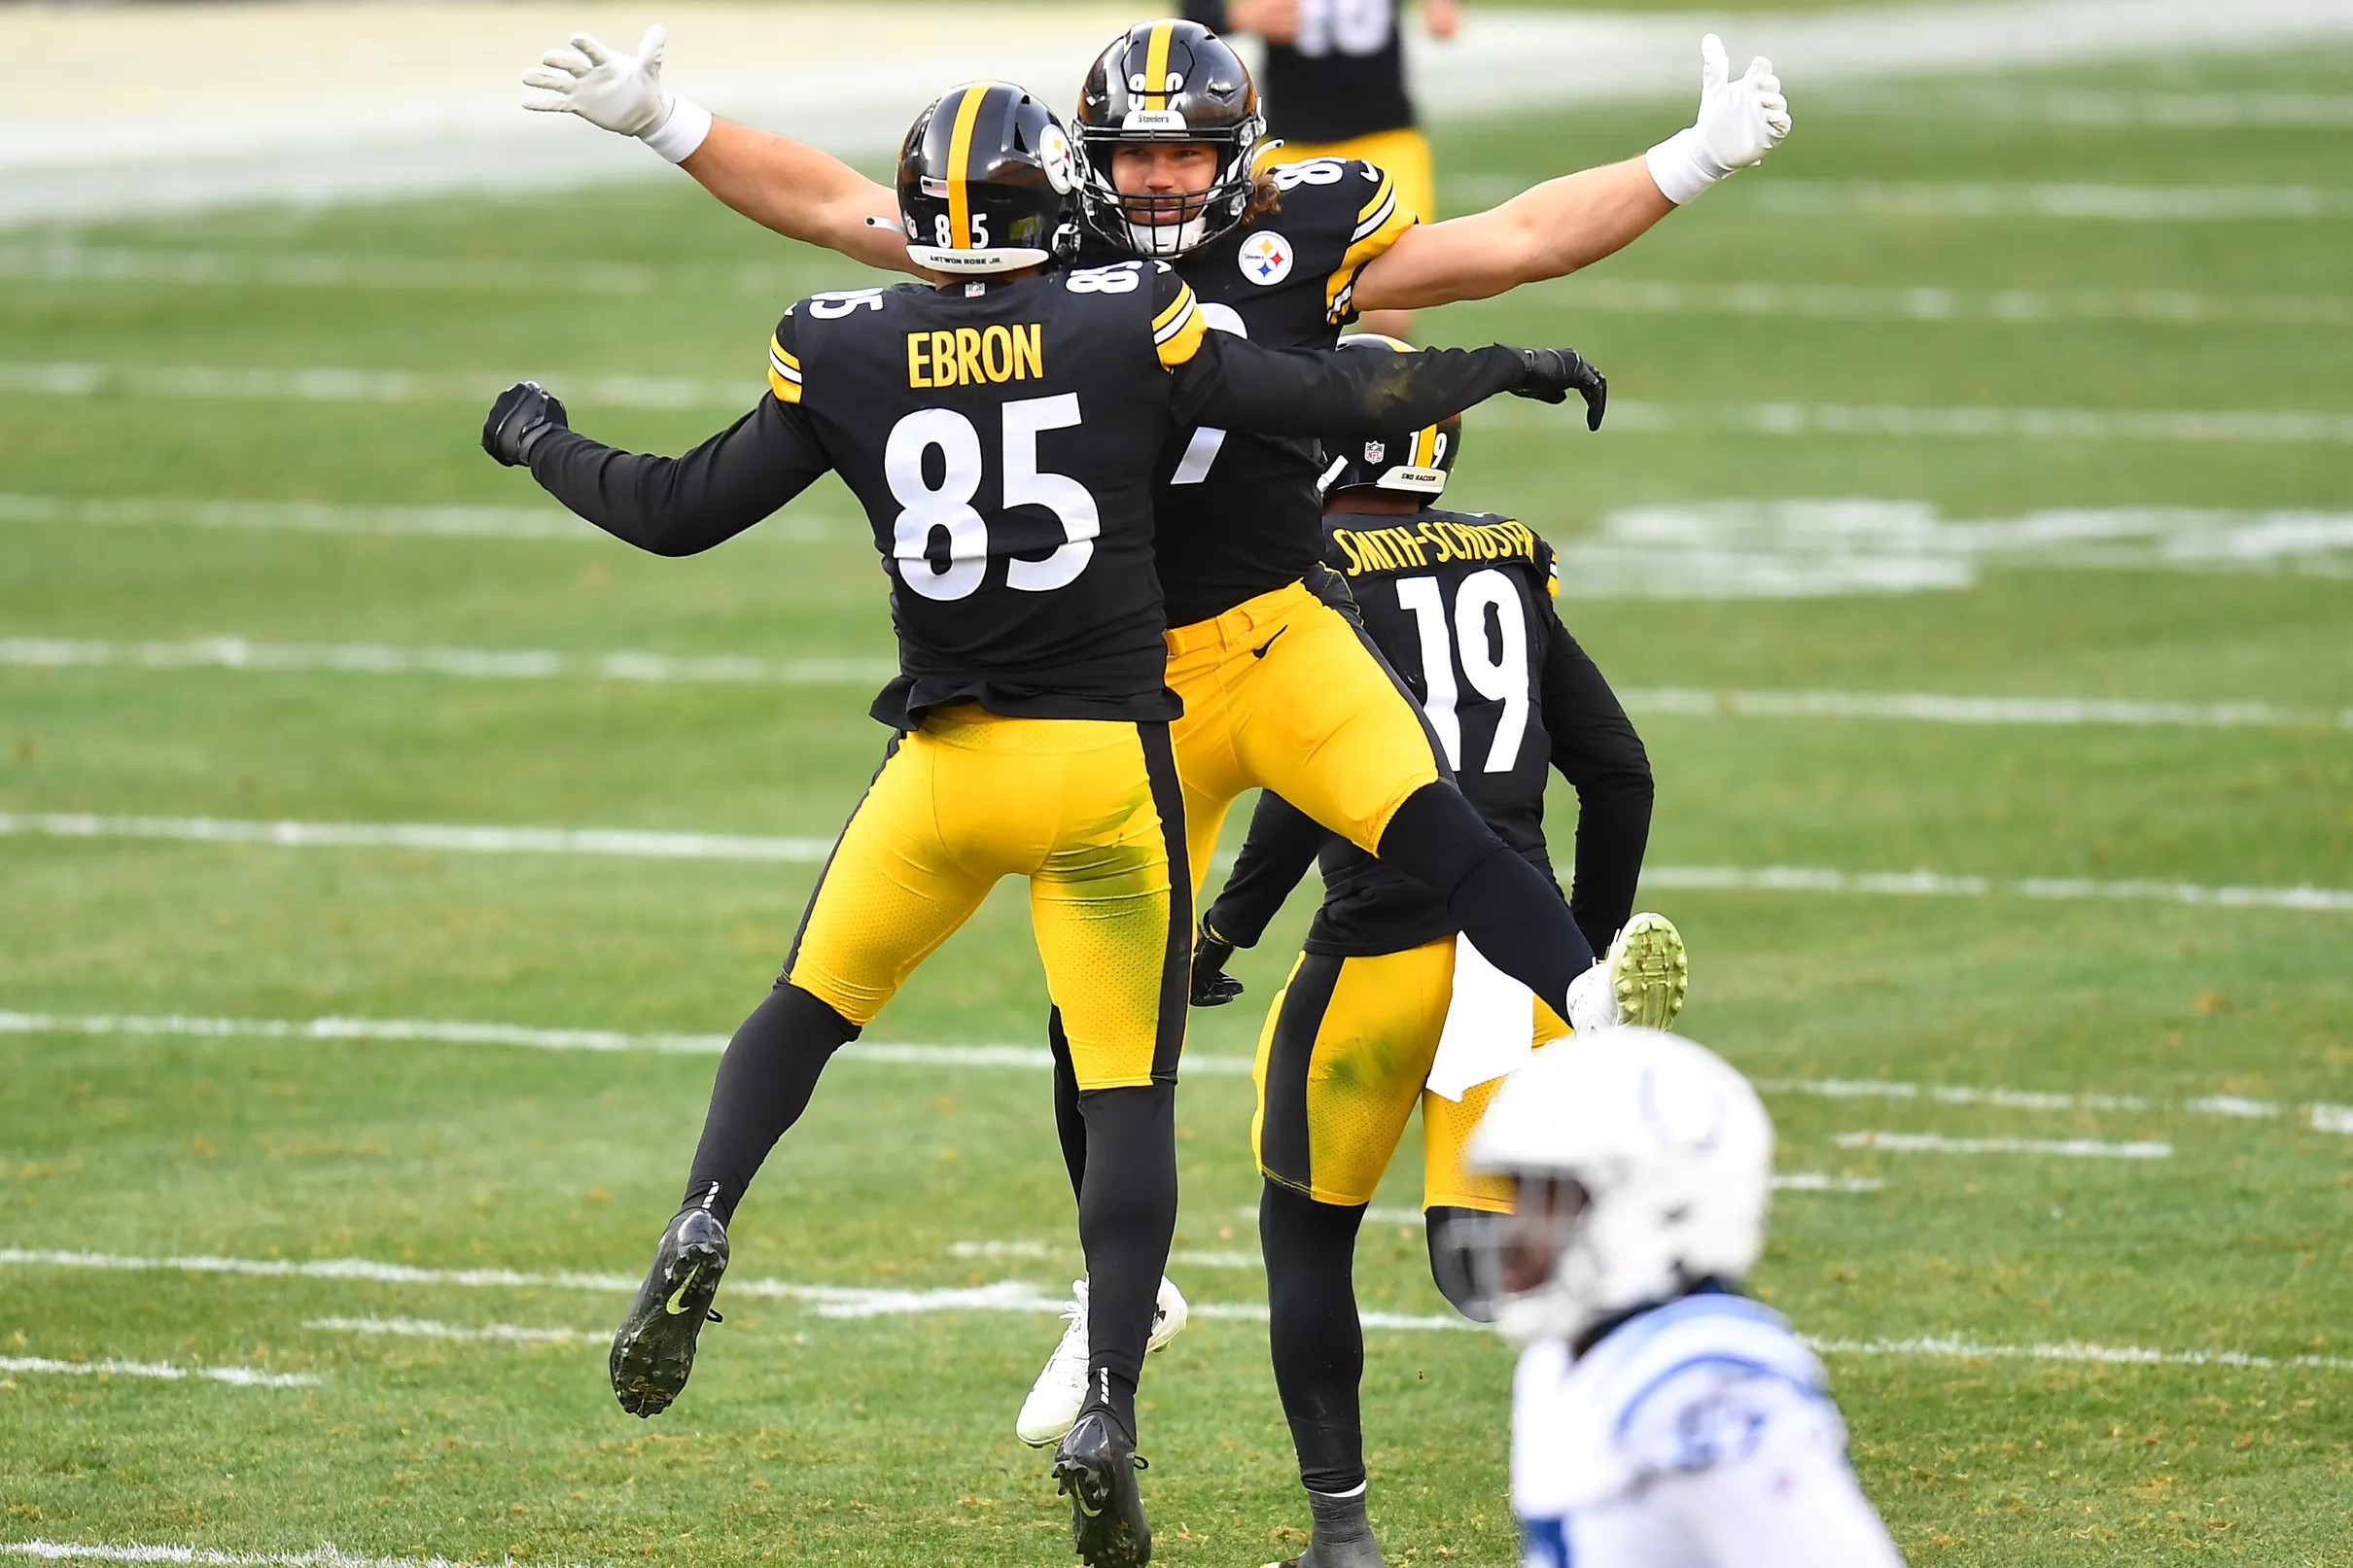 Steelers players take to social media to talk about their win over the